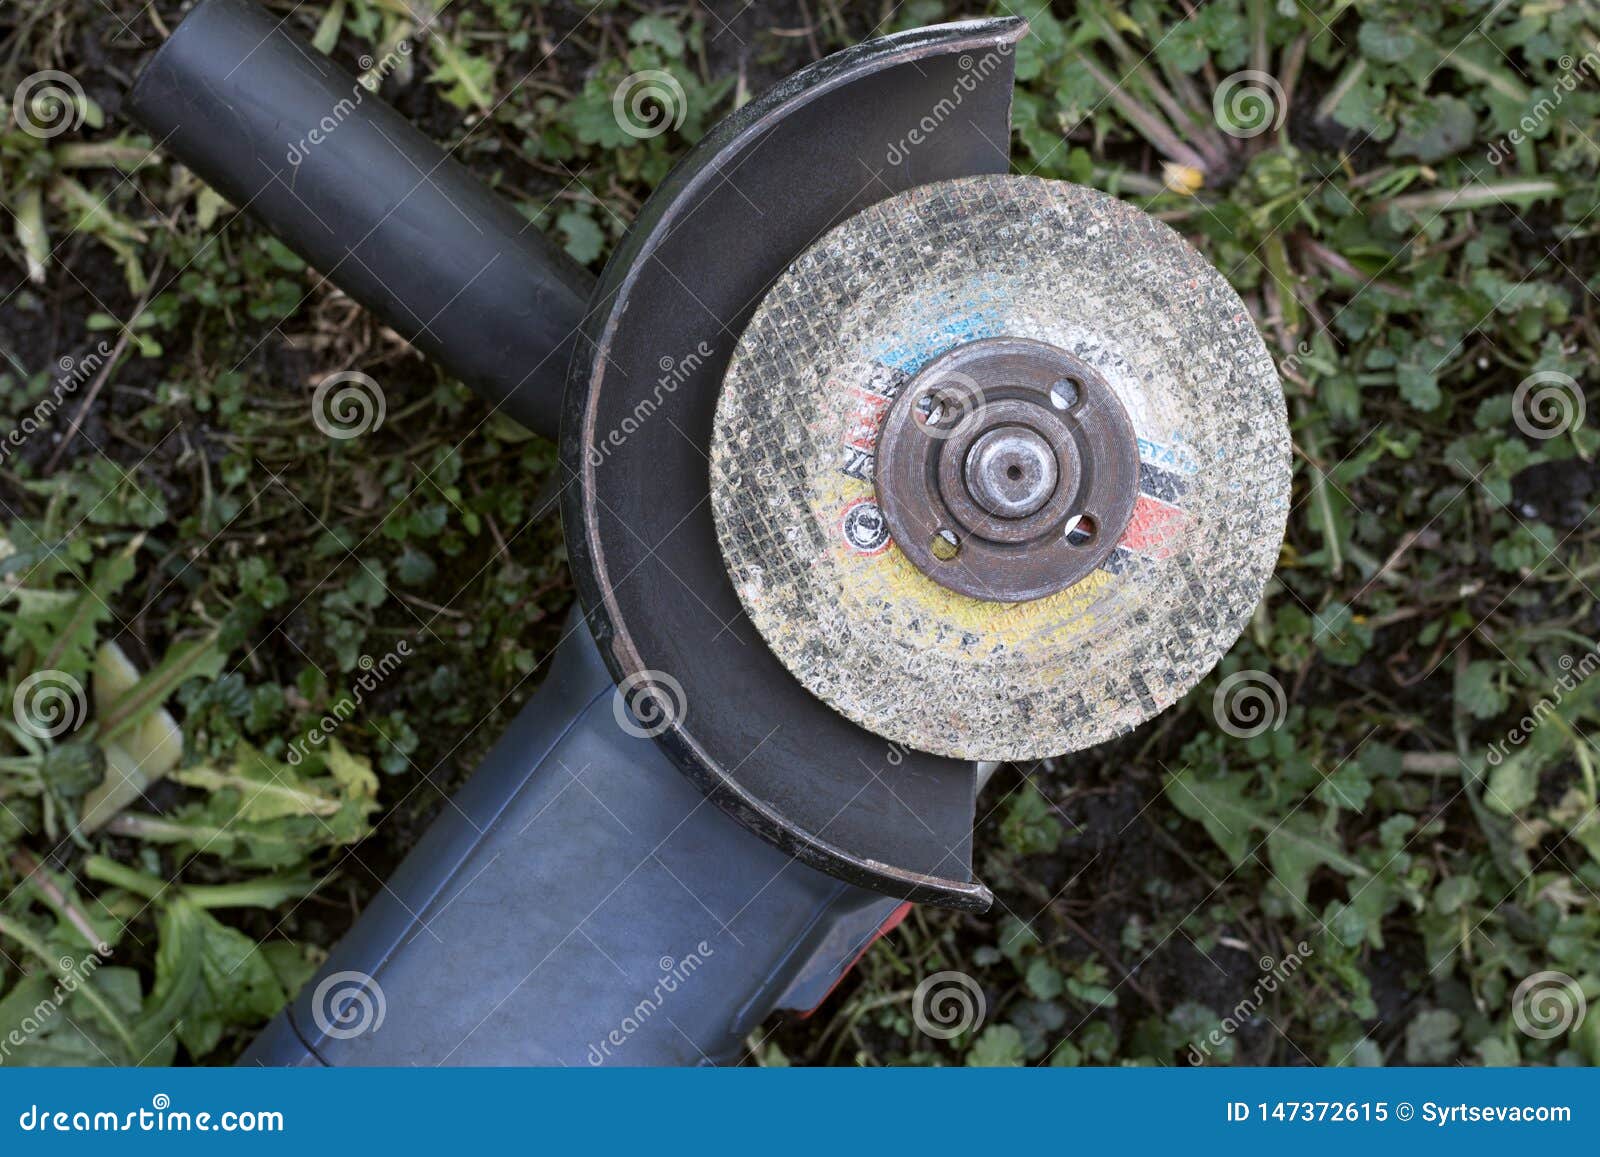 Tool For Cutting Metal On The Grass Close Up Stock Image Image Of